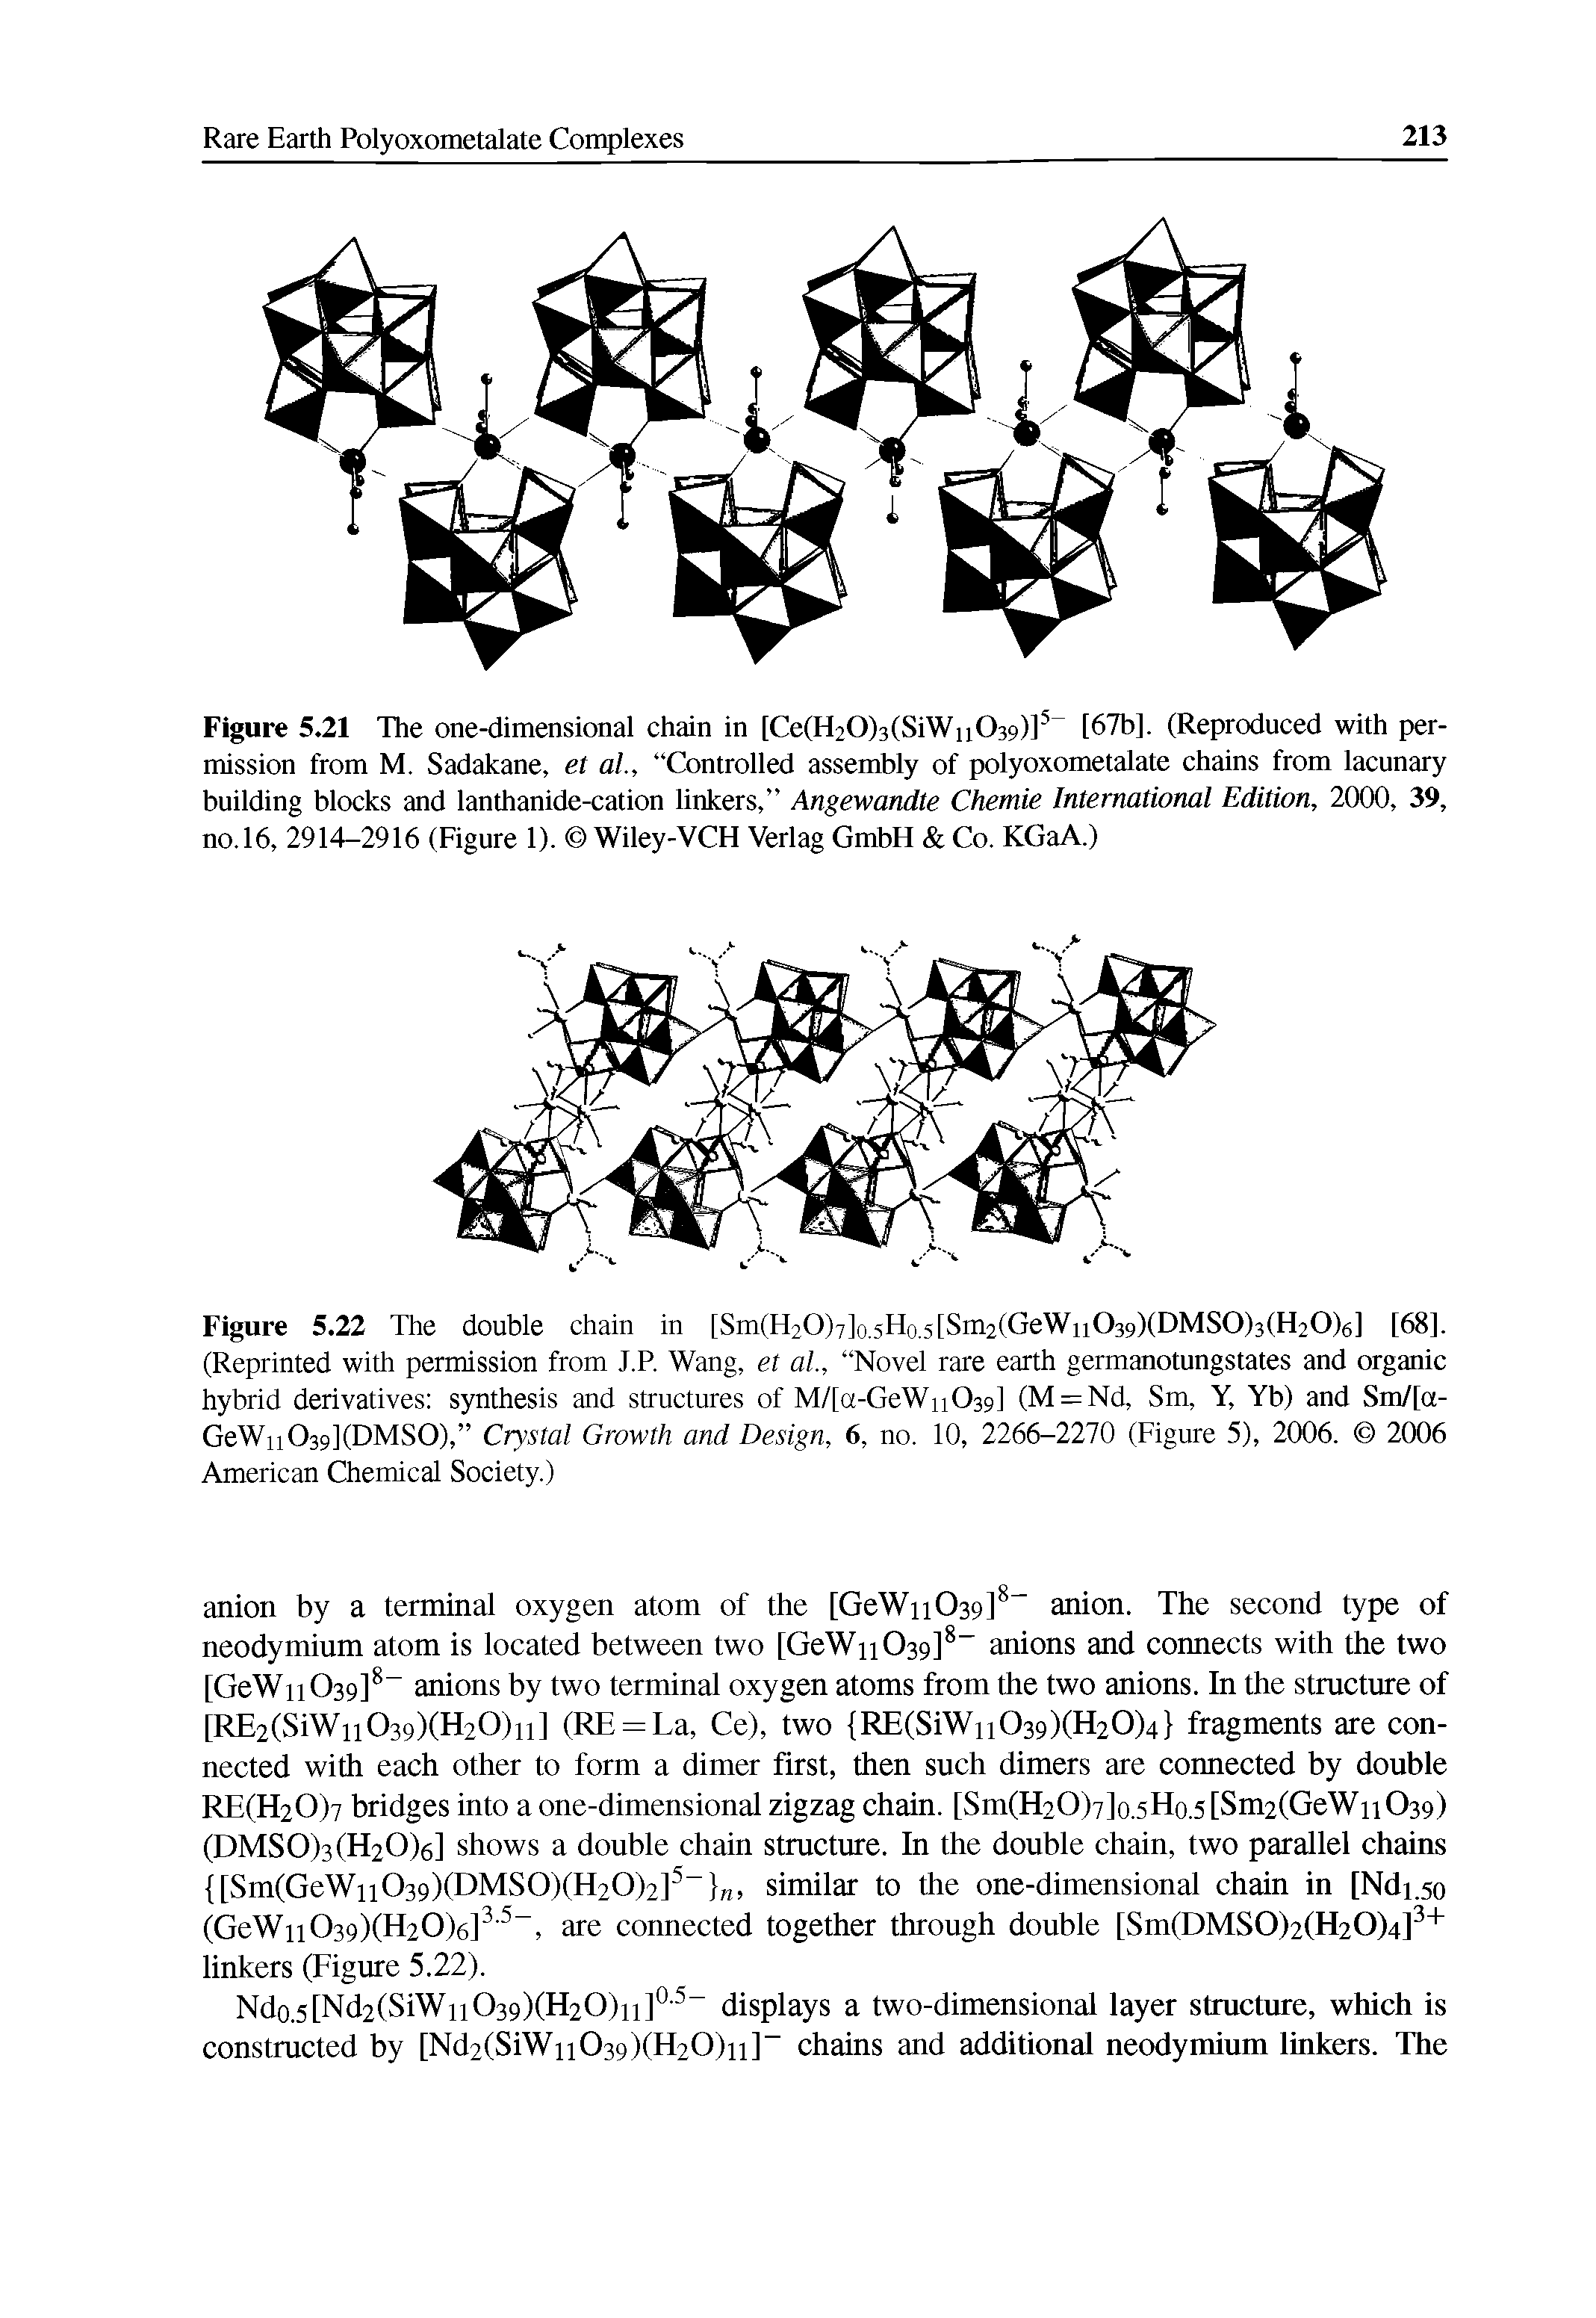 Figure 5.21 The one-dimensional chain in [Ce(H20)3(SiWn039)] [67b], (Reproduced with permission from M. Sadakane, et ai, Controlled assembly of polyoxometalate chains from lacunary building blocks and lanthanide-cation linkers, Angewandte Chemie International Edition, 2000, 39, no.l6, 2914-2916 (Figure 1). Wiley-VCH Verlag GmbH Co. KGaA.)...